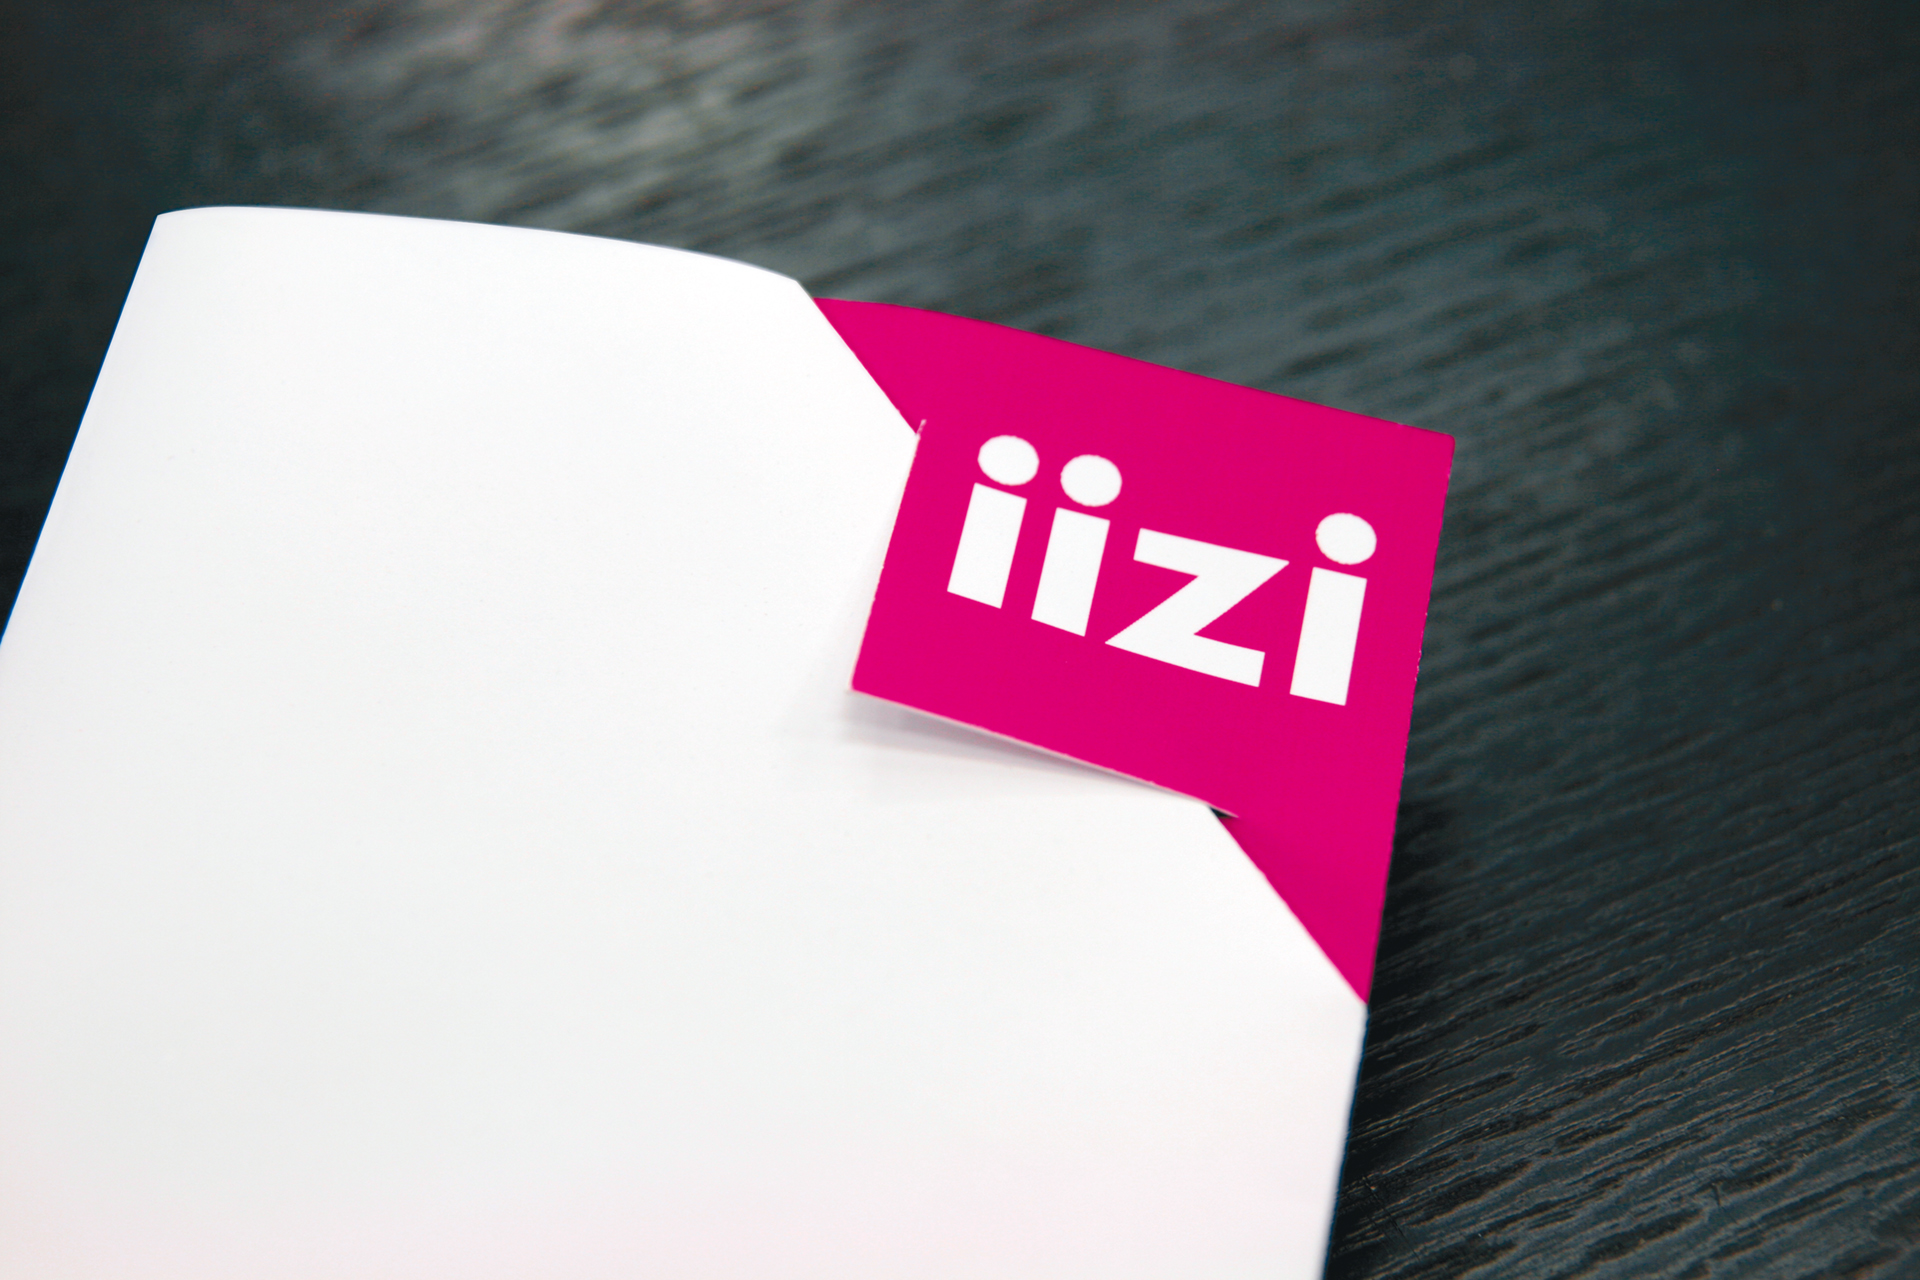 Iizi project involved a new visual look and concept in order to create a new innovative insurance broker, operating on a digital platform.